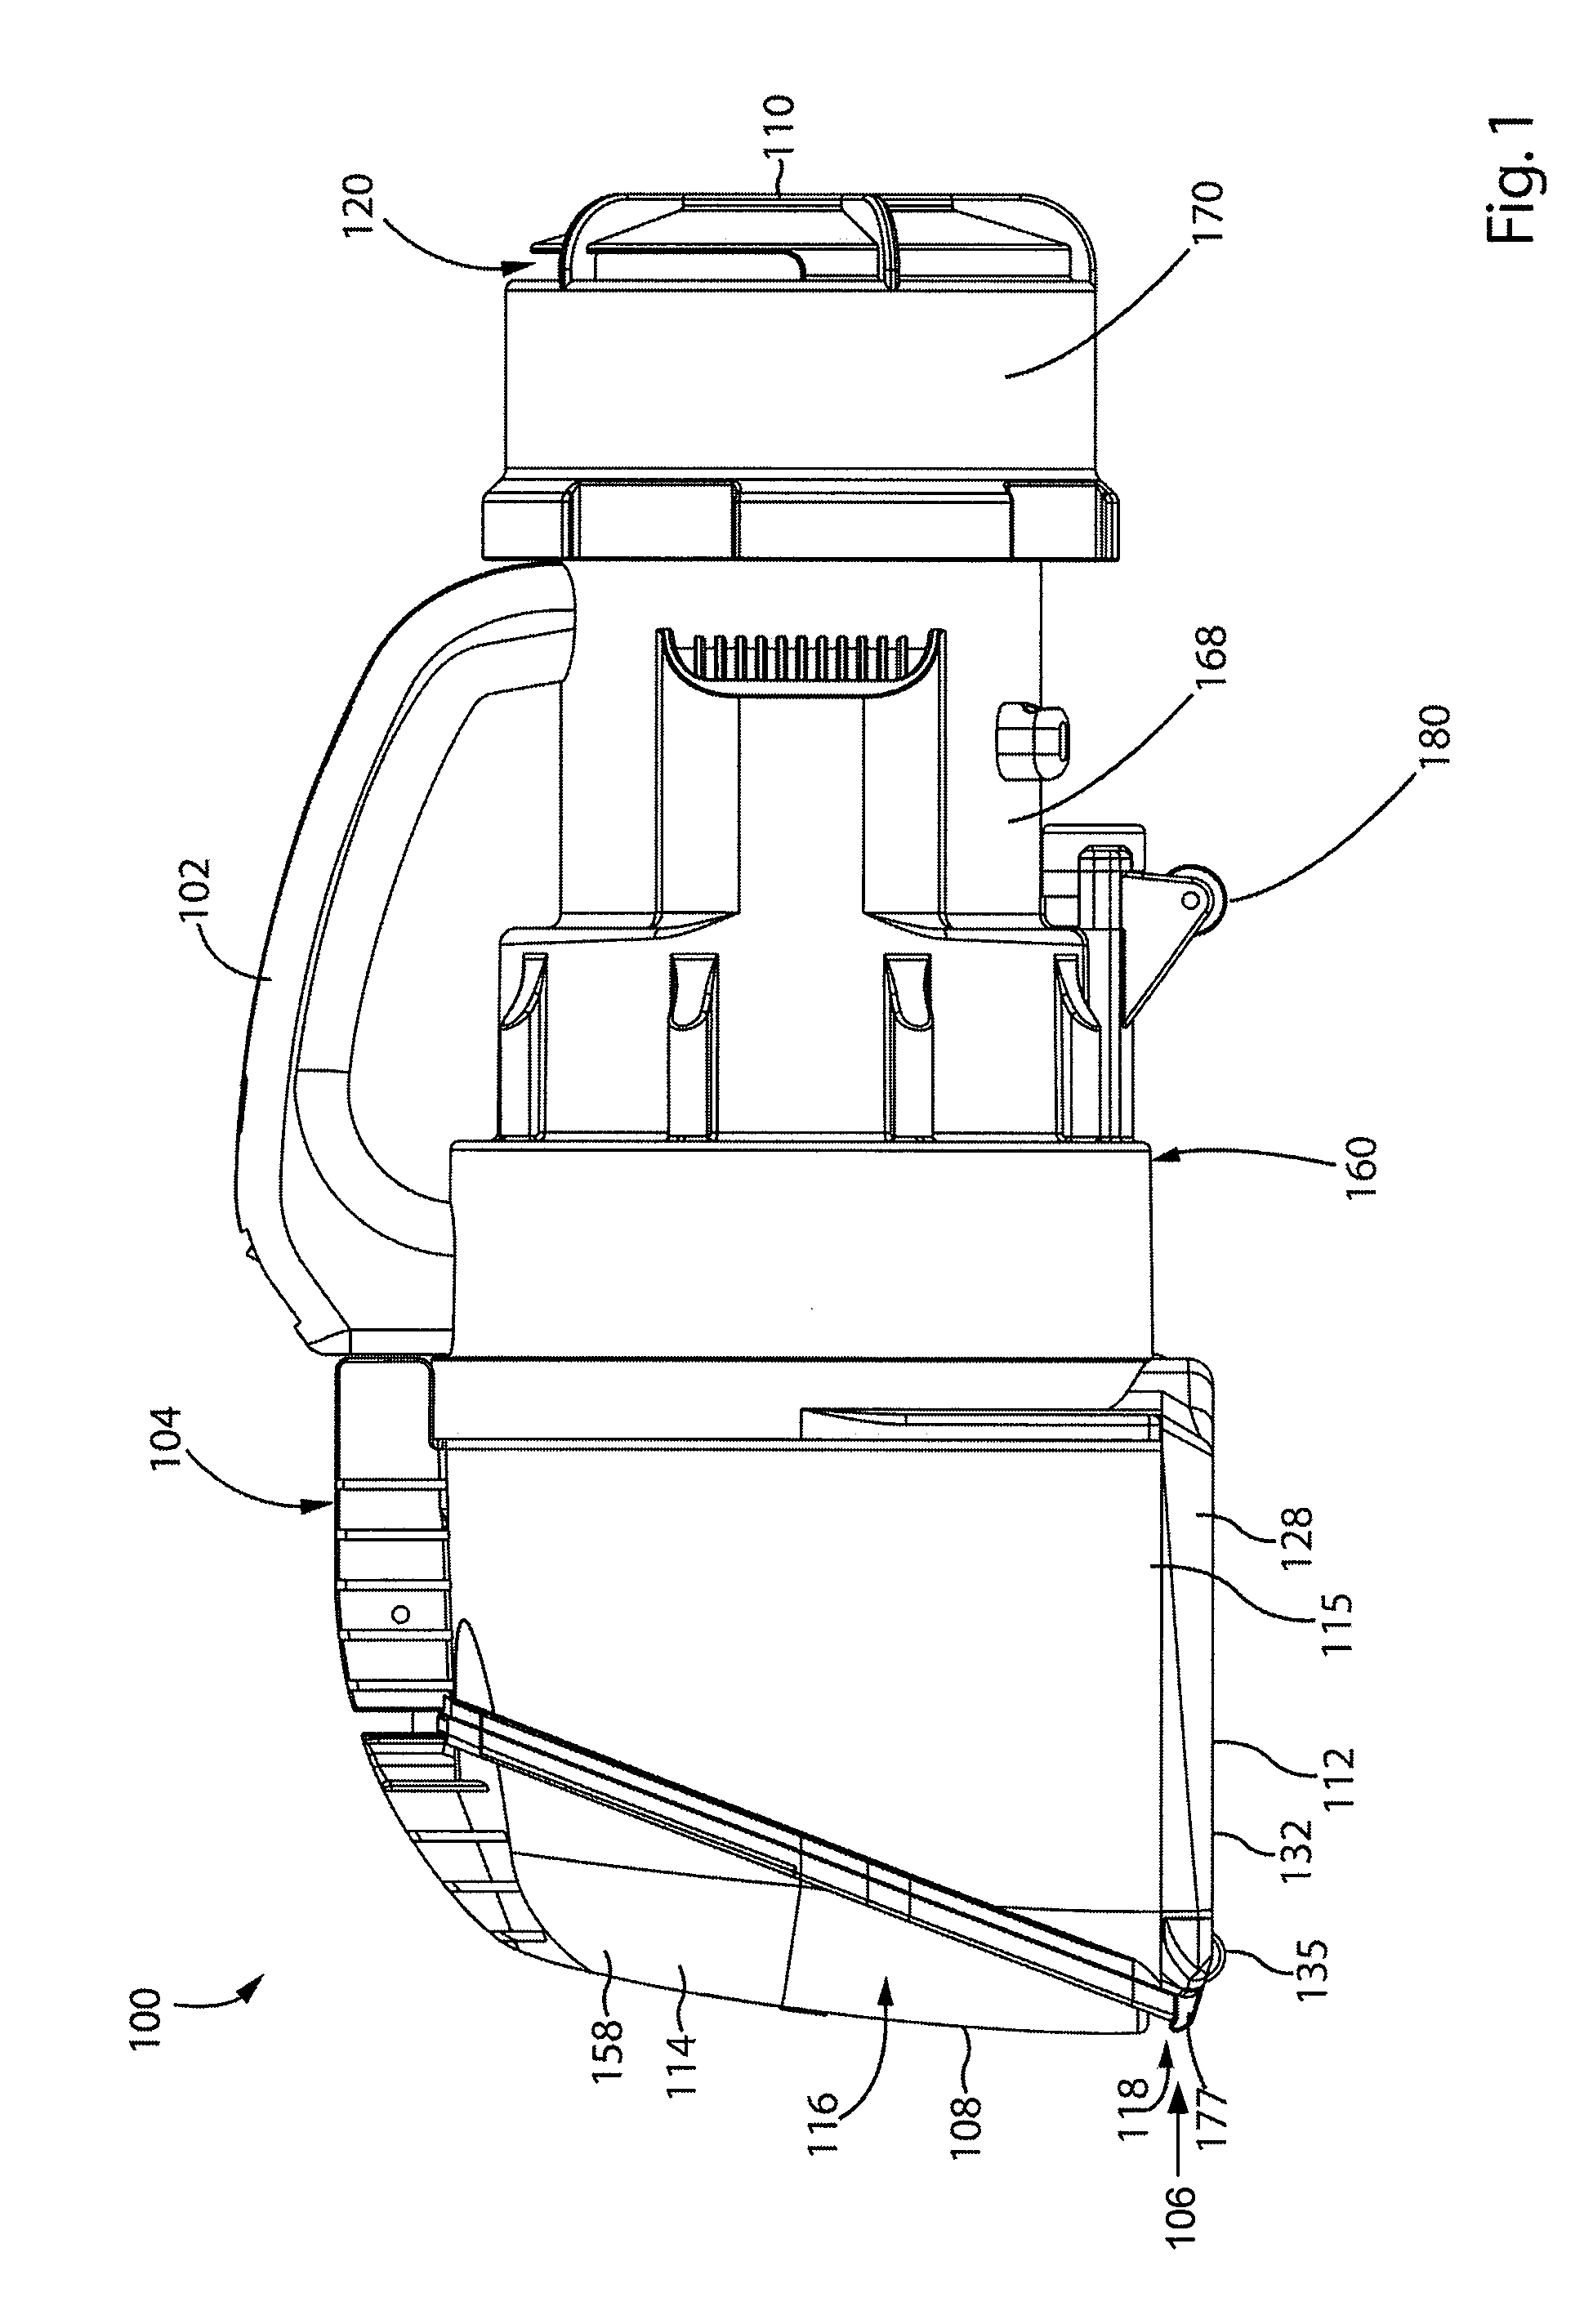 Cyclonic surface cleaning apparatus